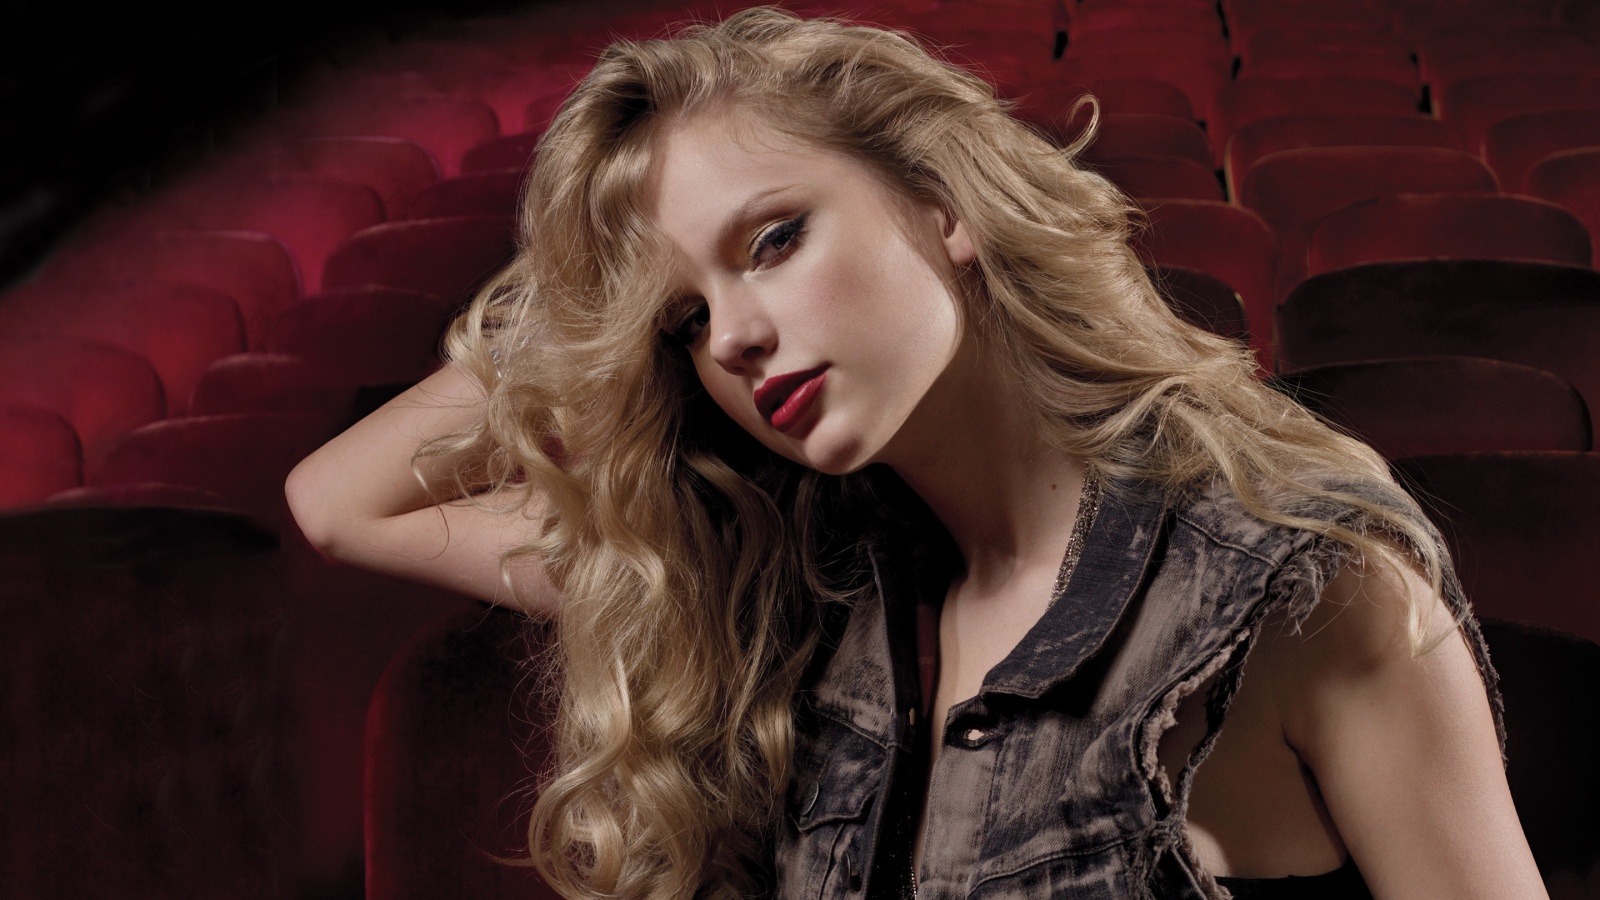 Taylor Swift Wallpapers - 1600x900 - 410552